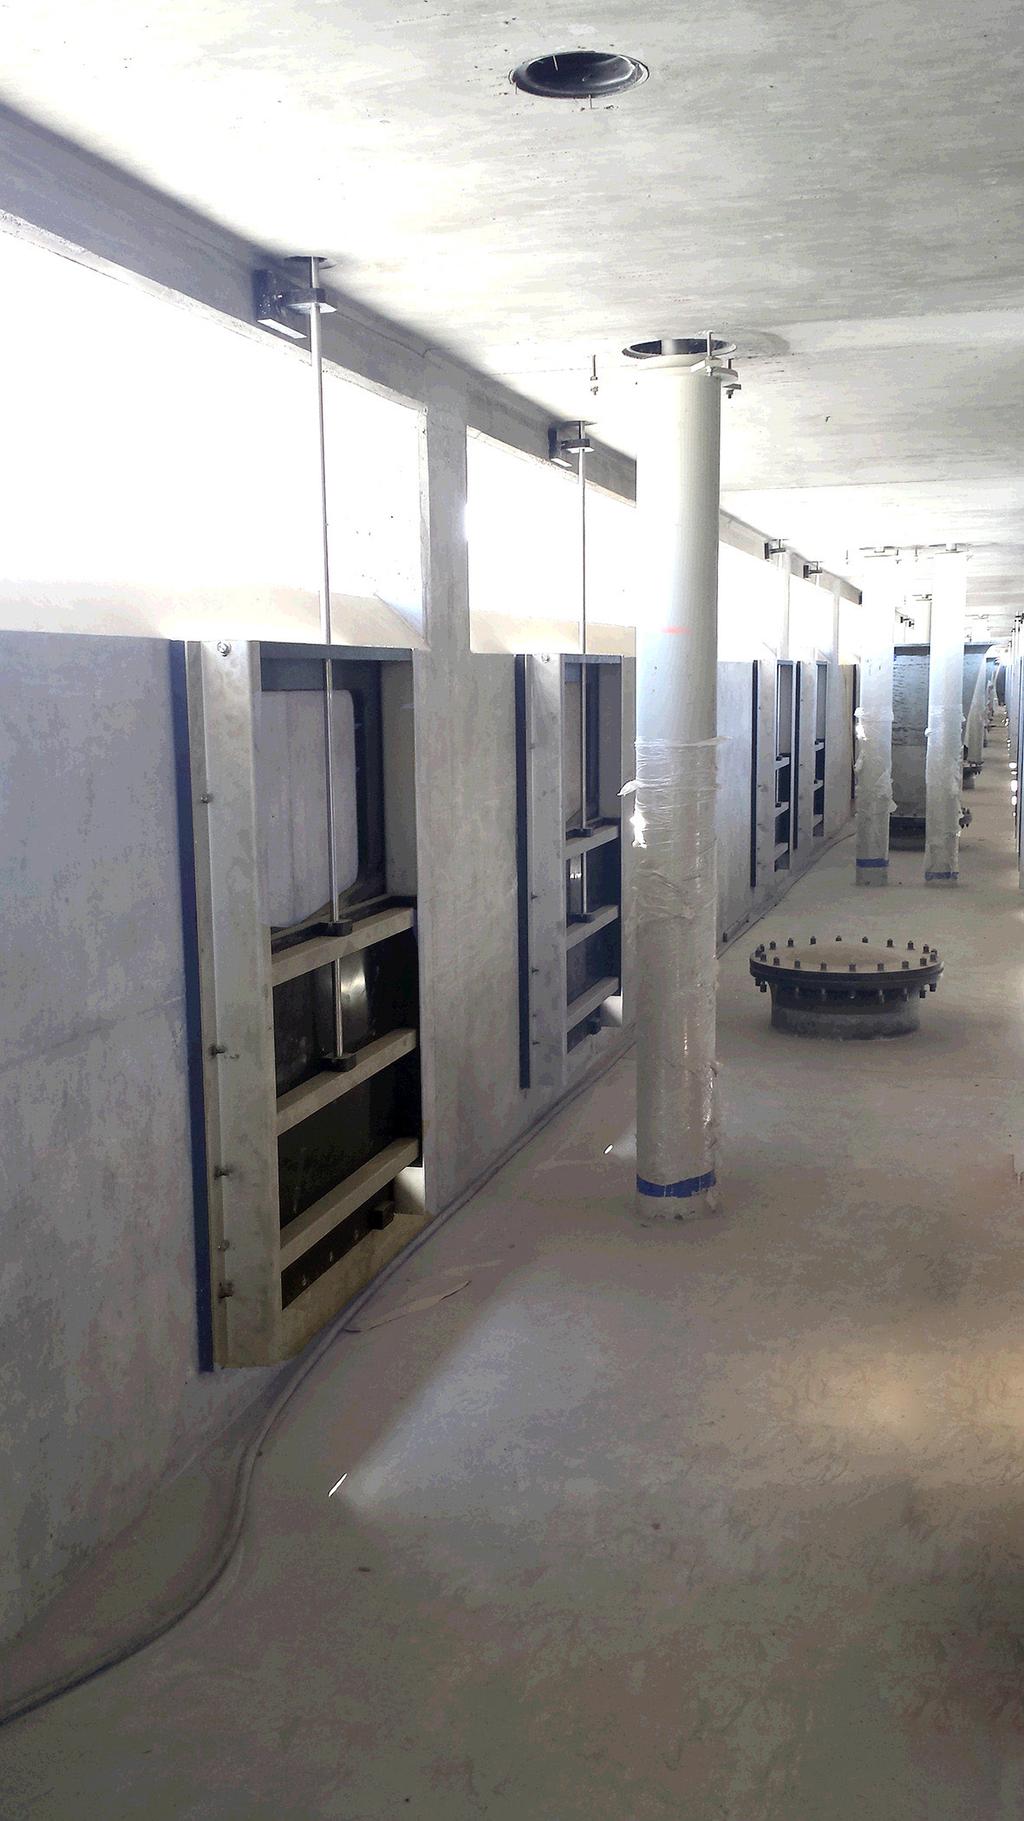 by Hakohav Valves SELECTED INSTALLATIONS Penstocks by KIM VALVES at the Carlsbad desalination plant in San Diego, California, the largest desalination plant in